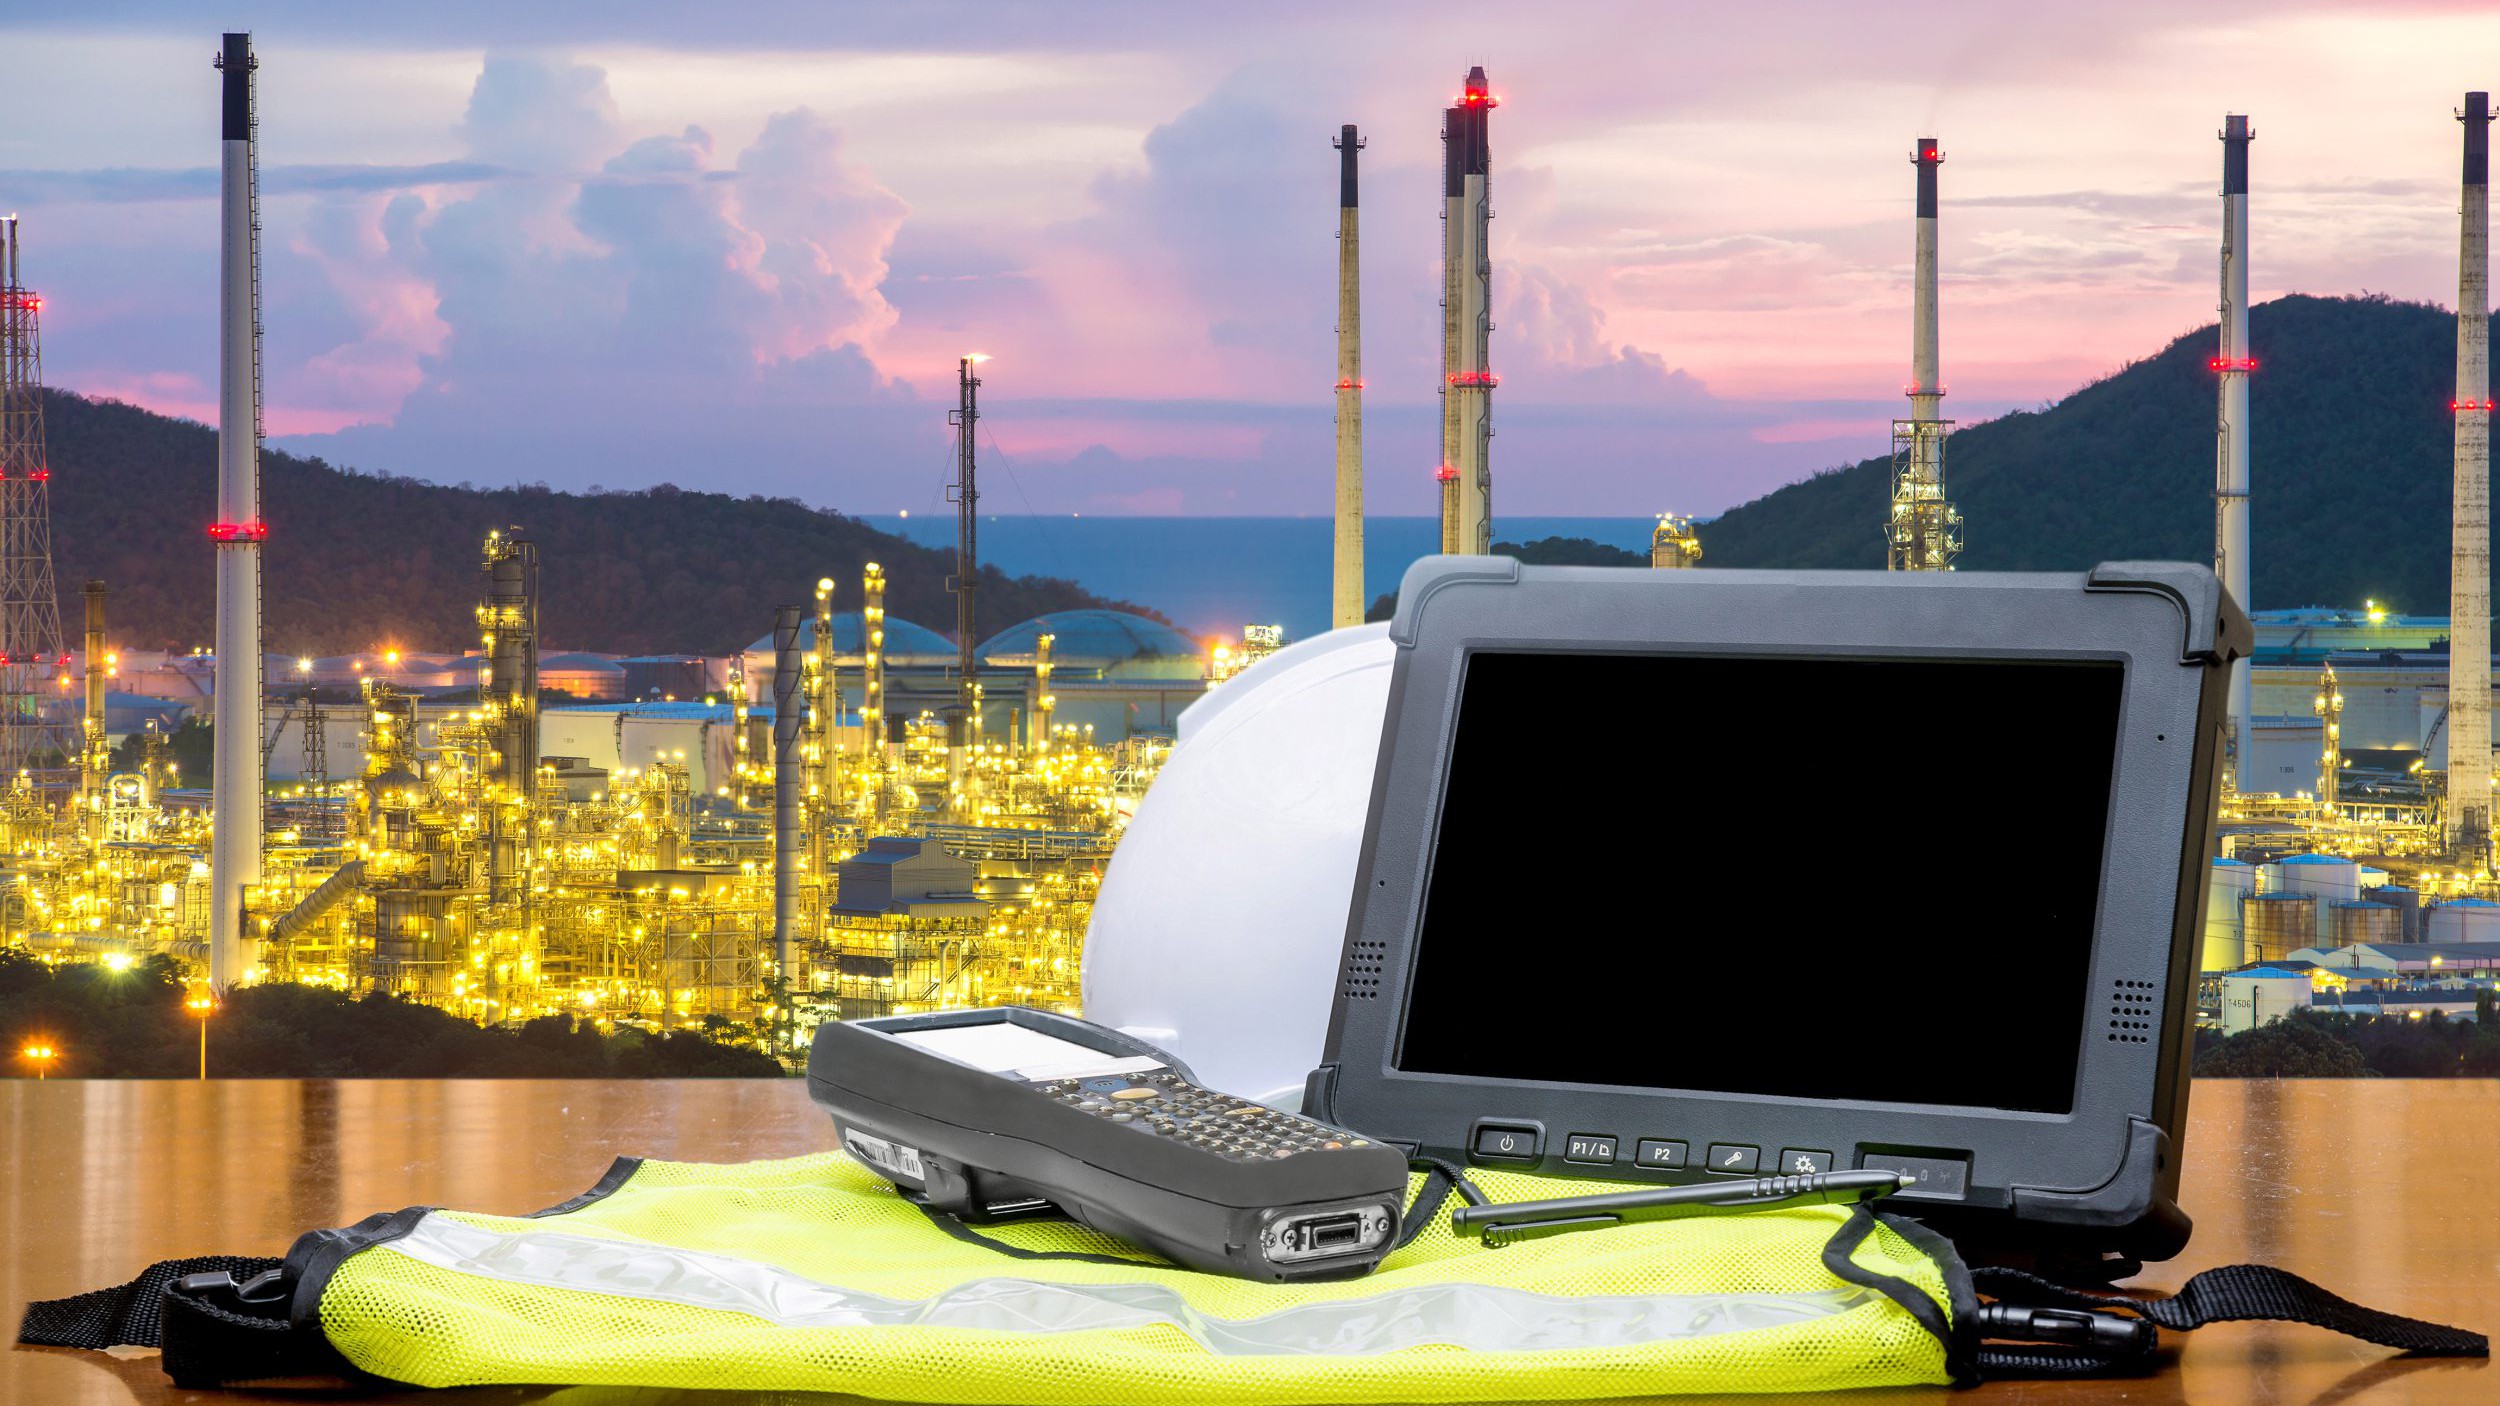 Rugged computers tablet in front of oil refinery industry.